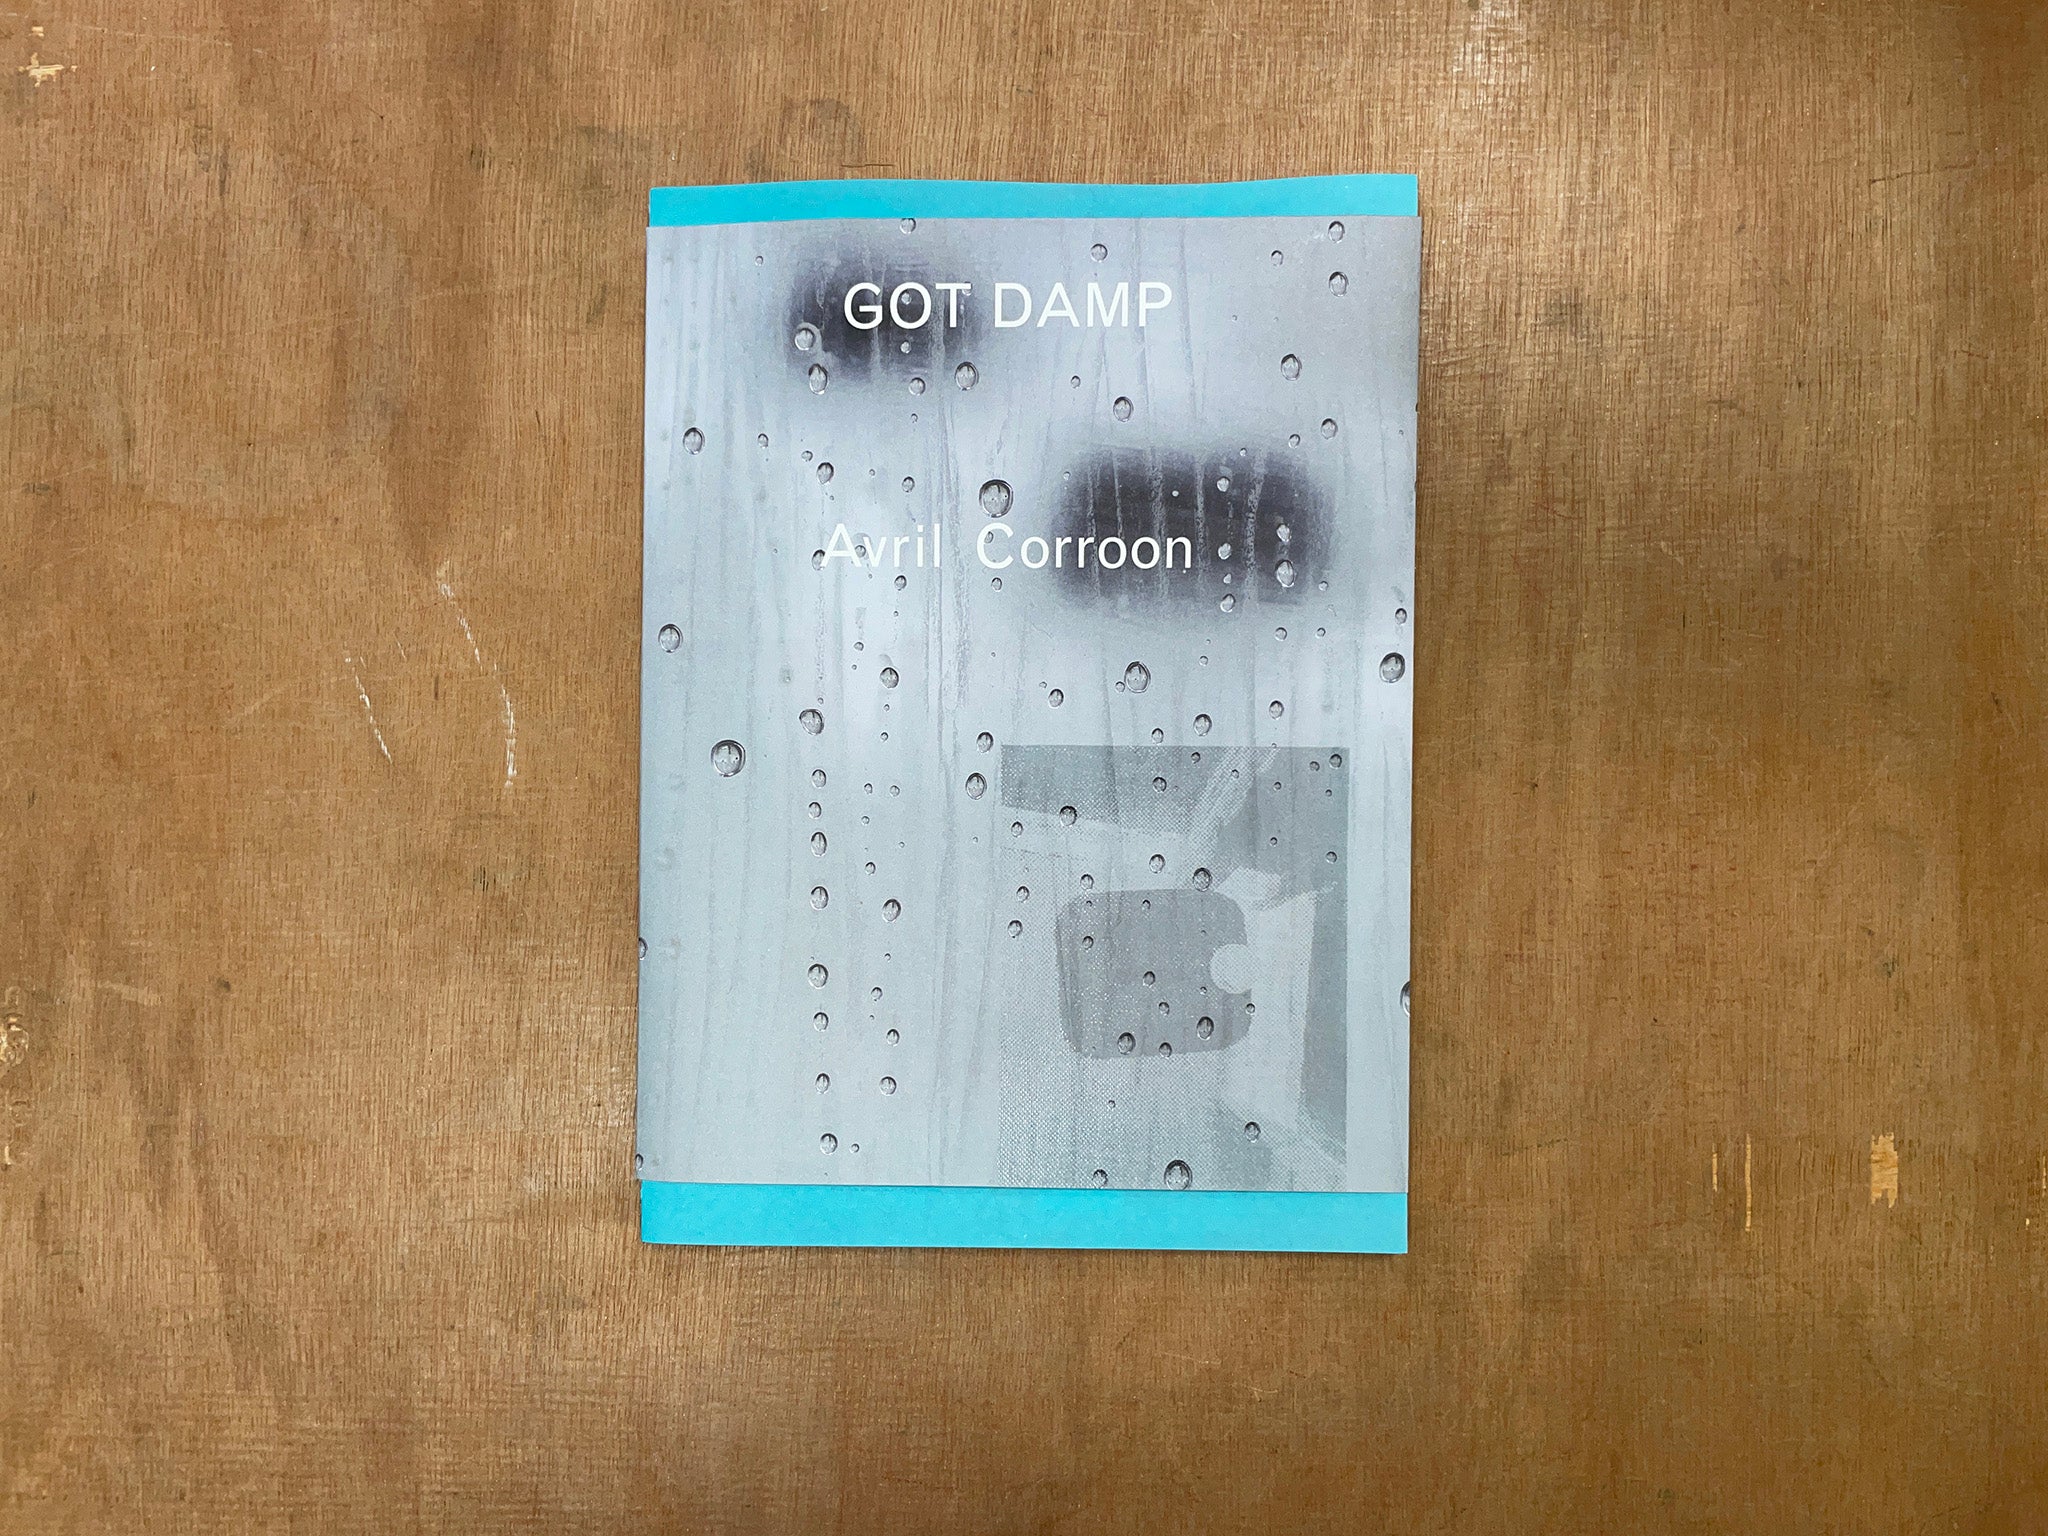 GOT DAMP by Avril Corroon